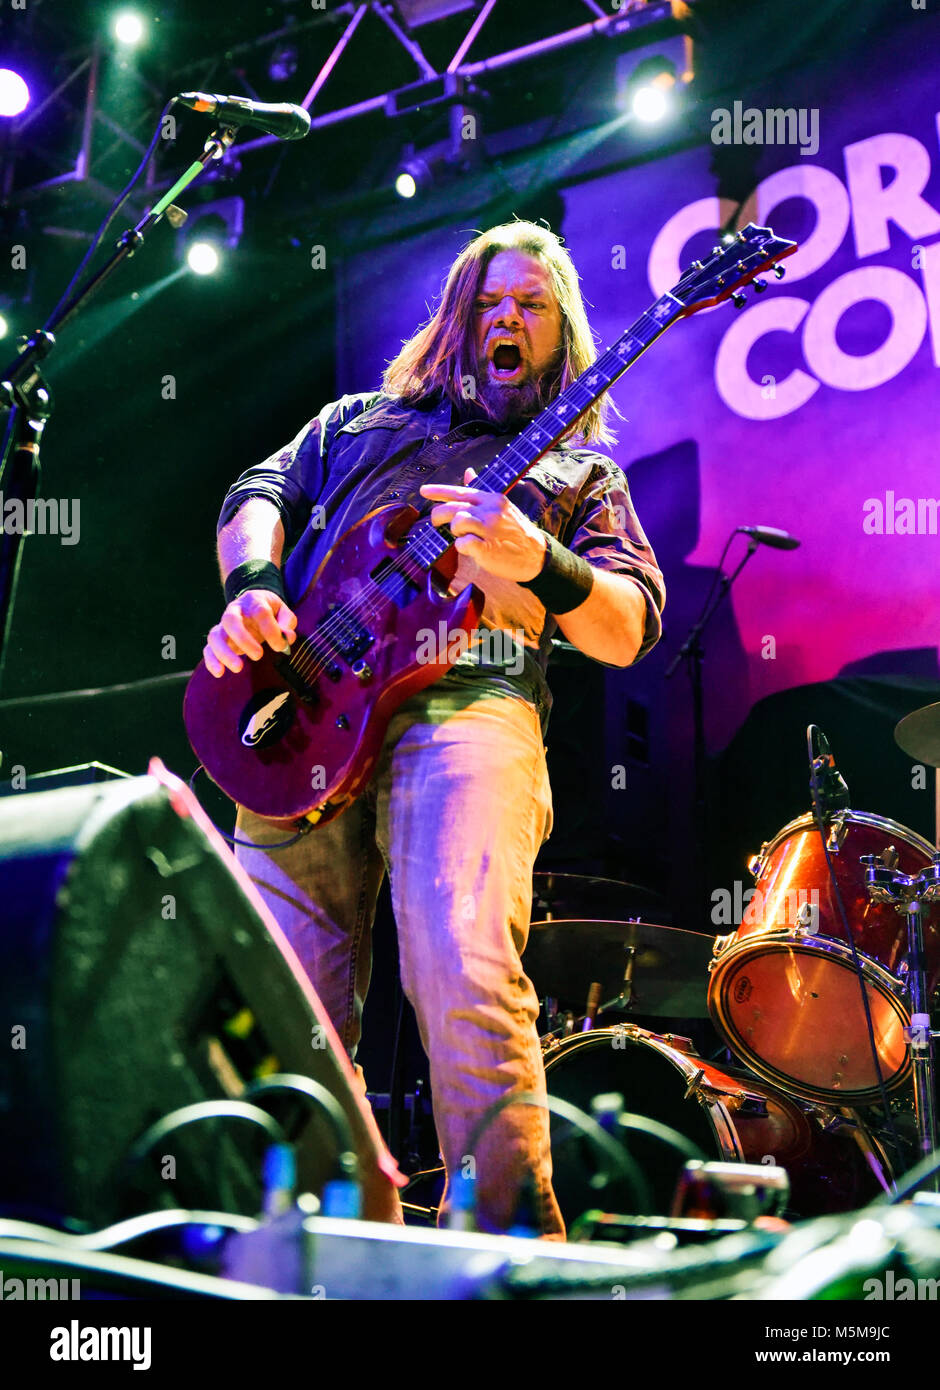 Las Vegas, Nevada, February 23, 2018 - Pepper Keenan of Corrosion of Conformity at the House of Blues in Las Vegas, NV - Photo Credit: Ken Howard Images Credit: Ken Howard/Alamy Live News Stock Photo